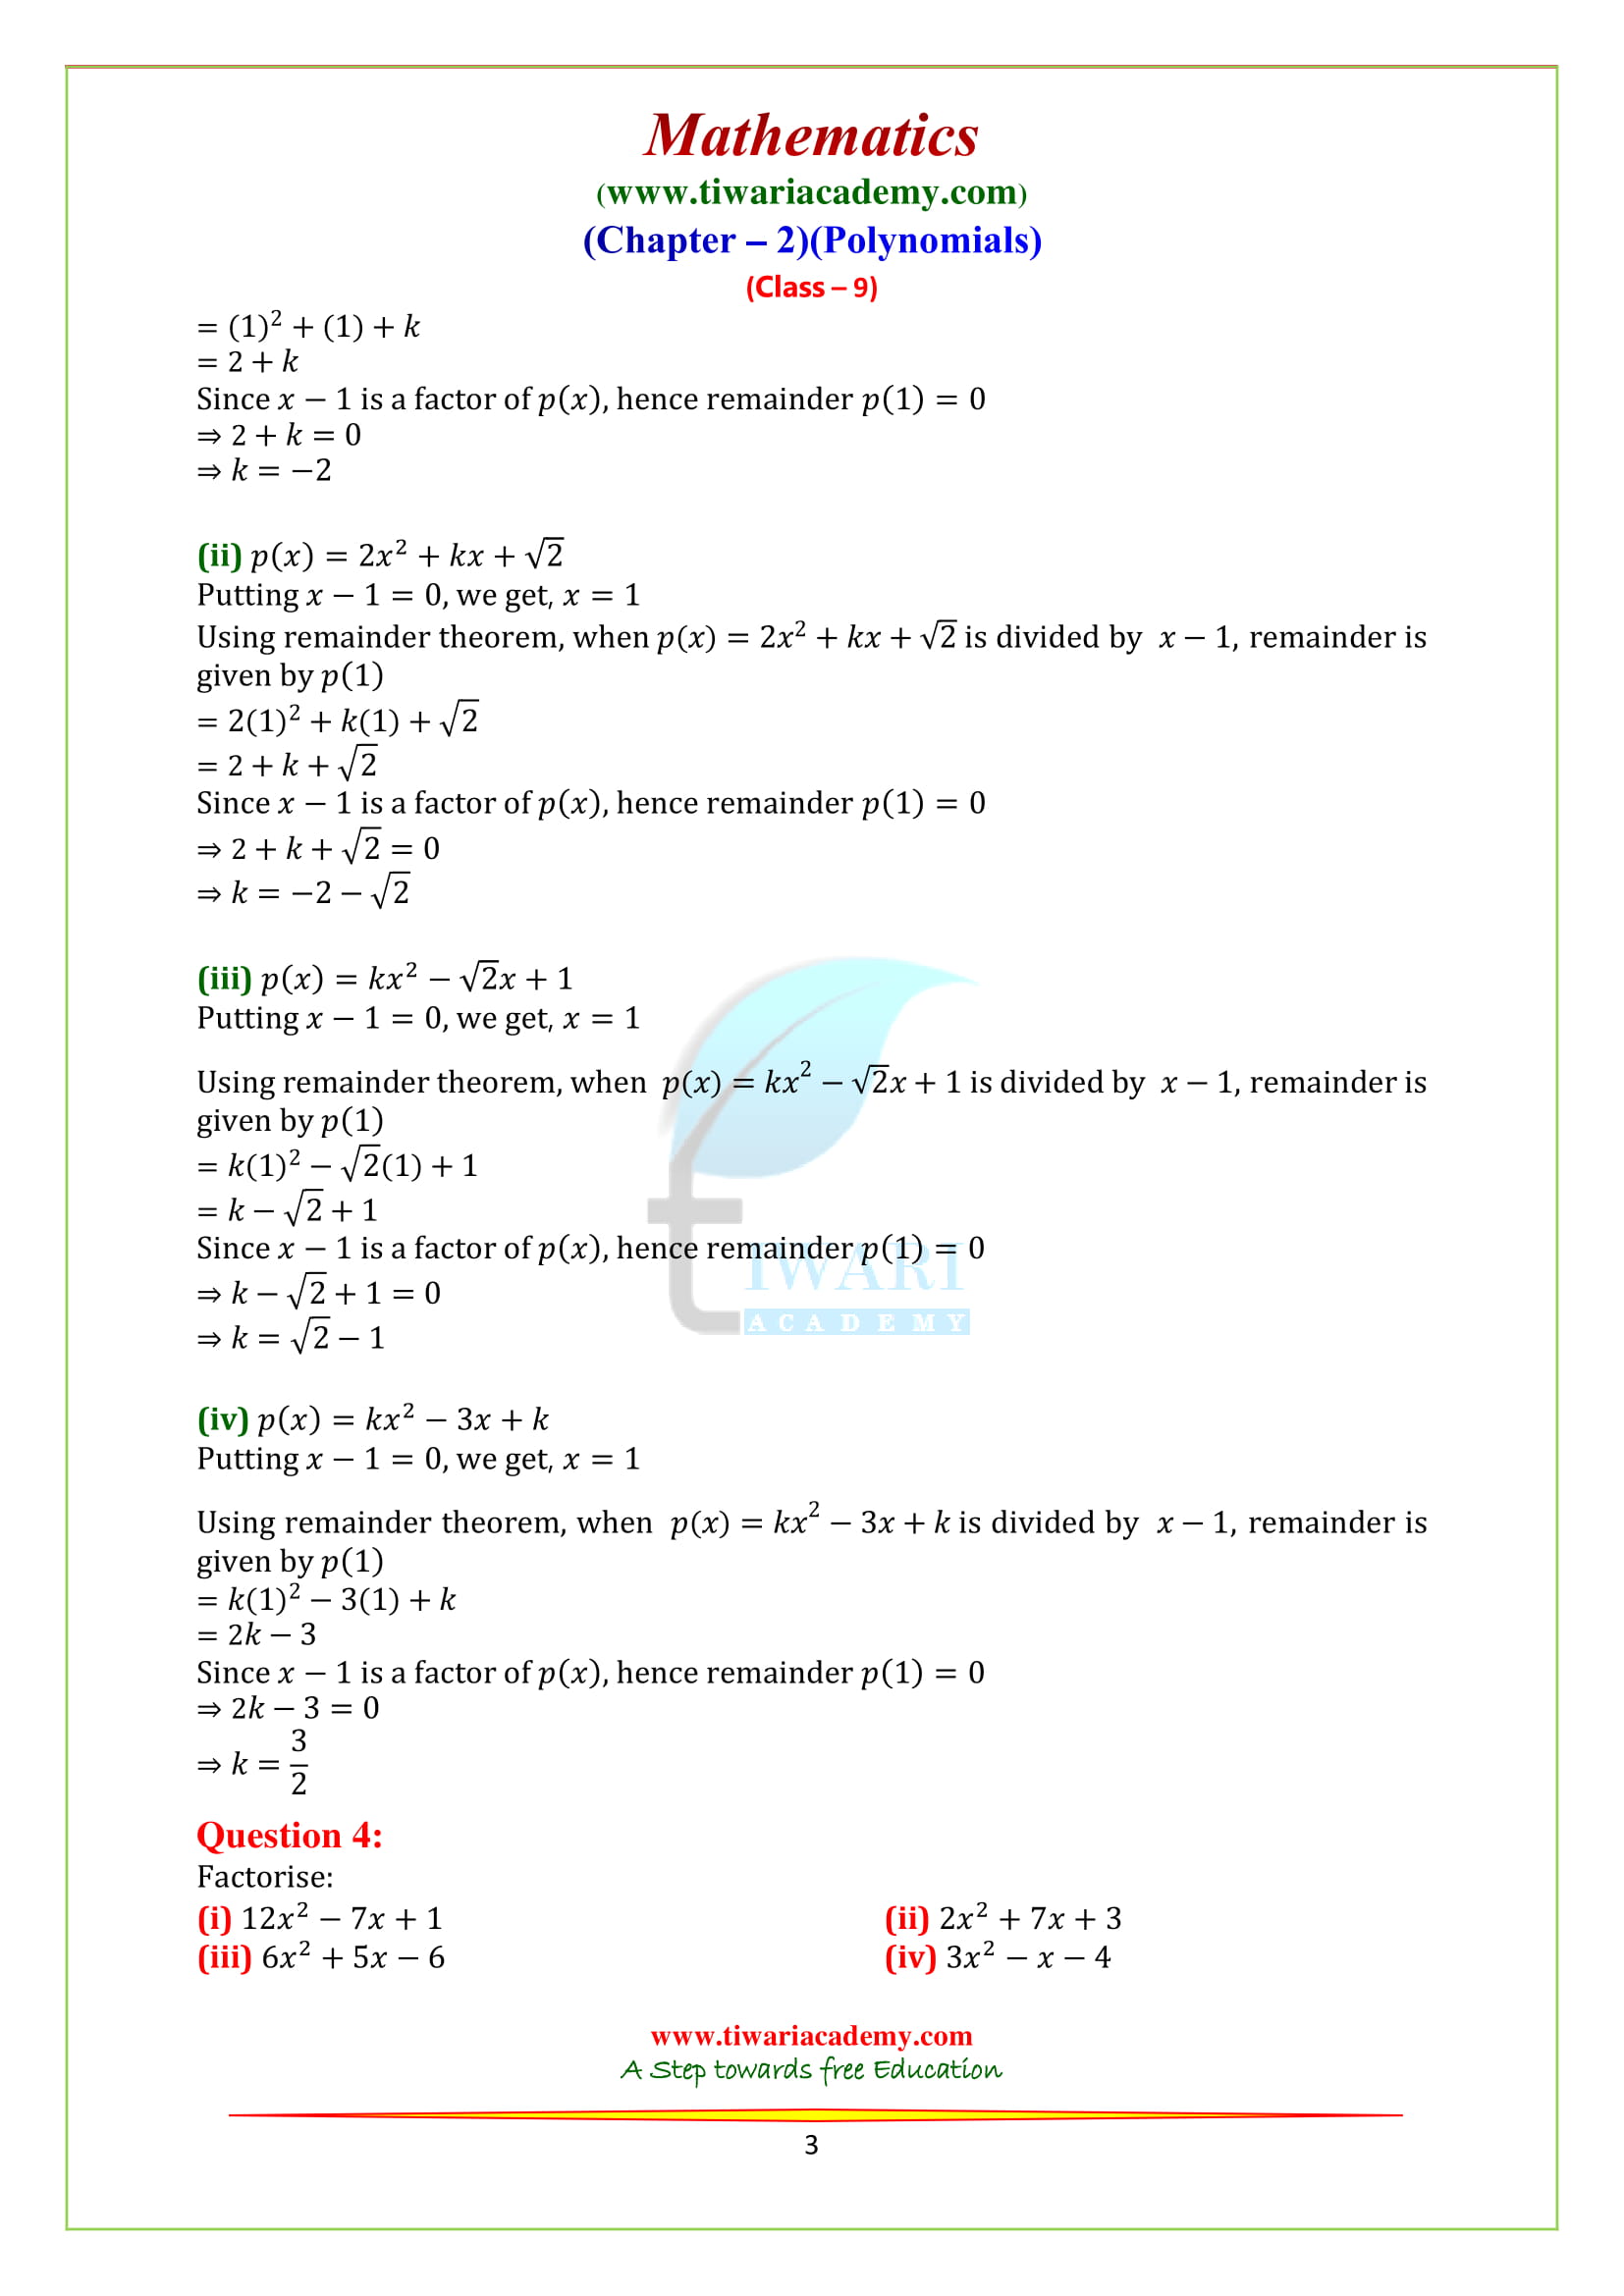 NCERT Solutions for class 9 Maths chapter 2 exercise 2.4 Polynomials in English